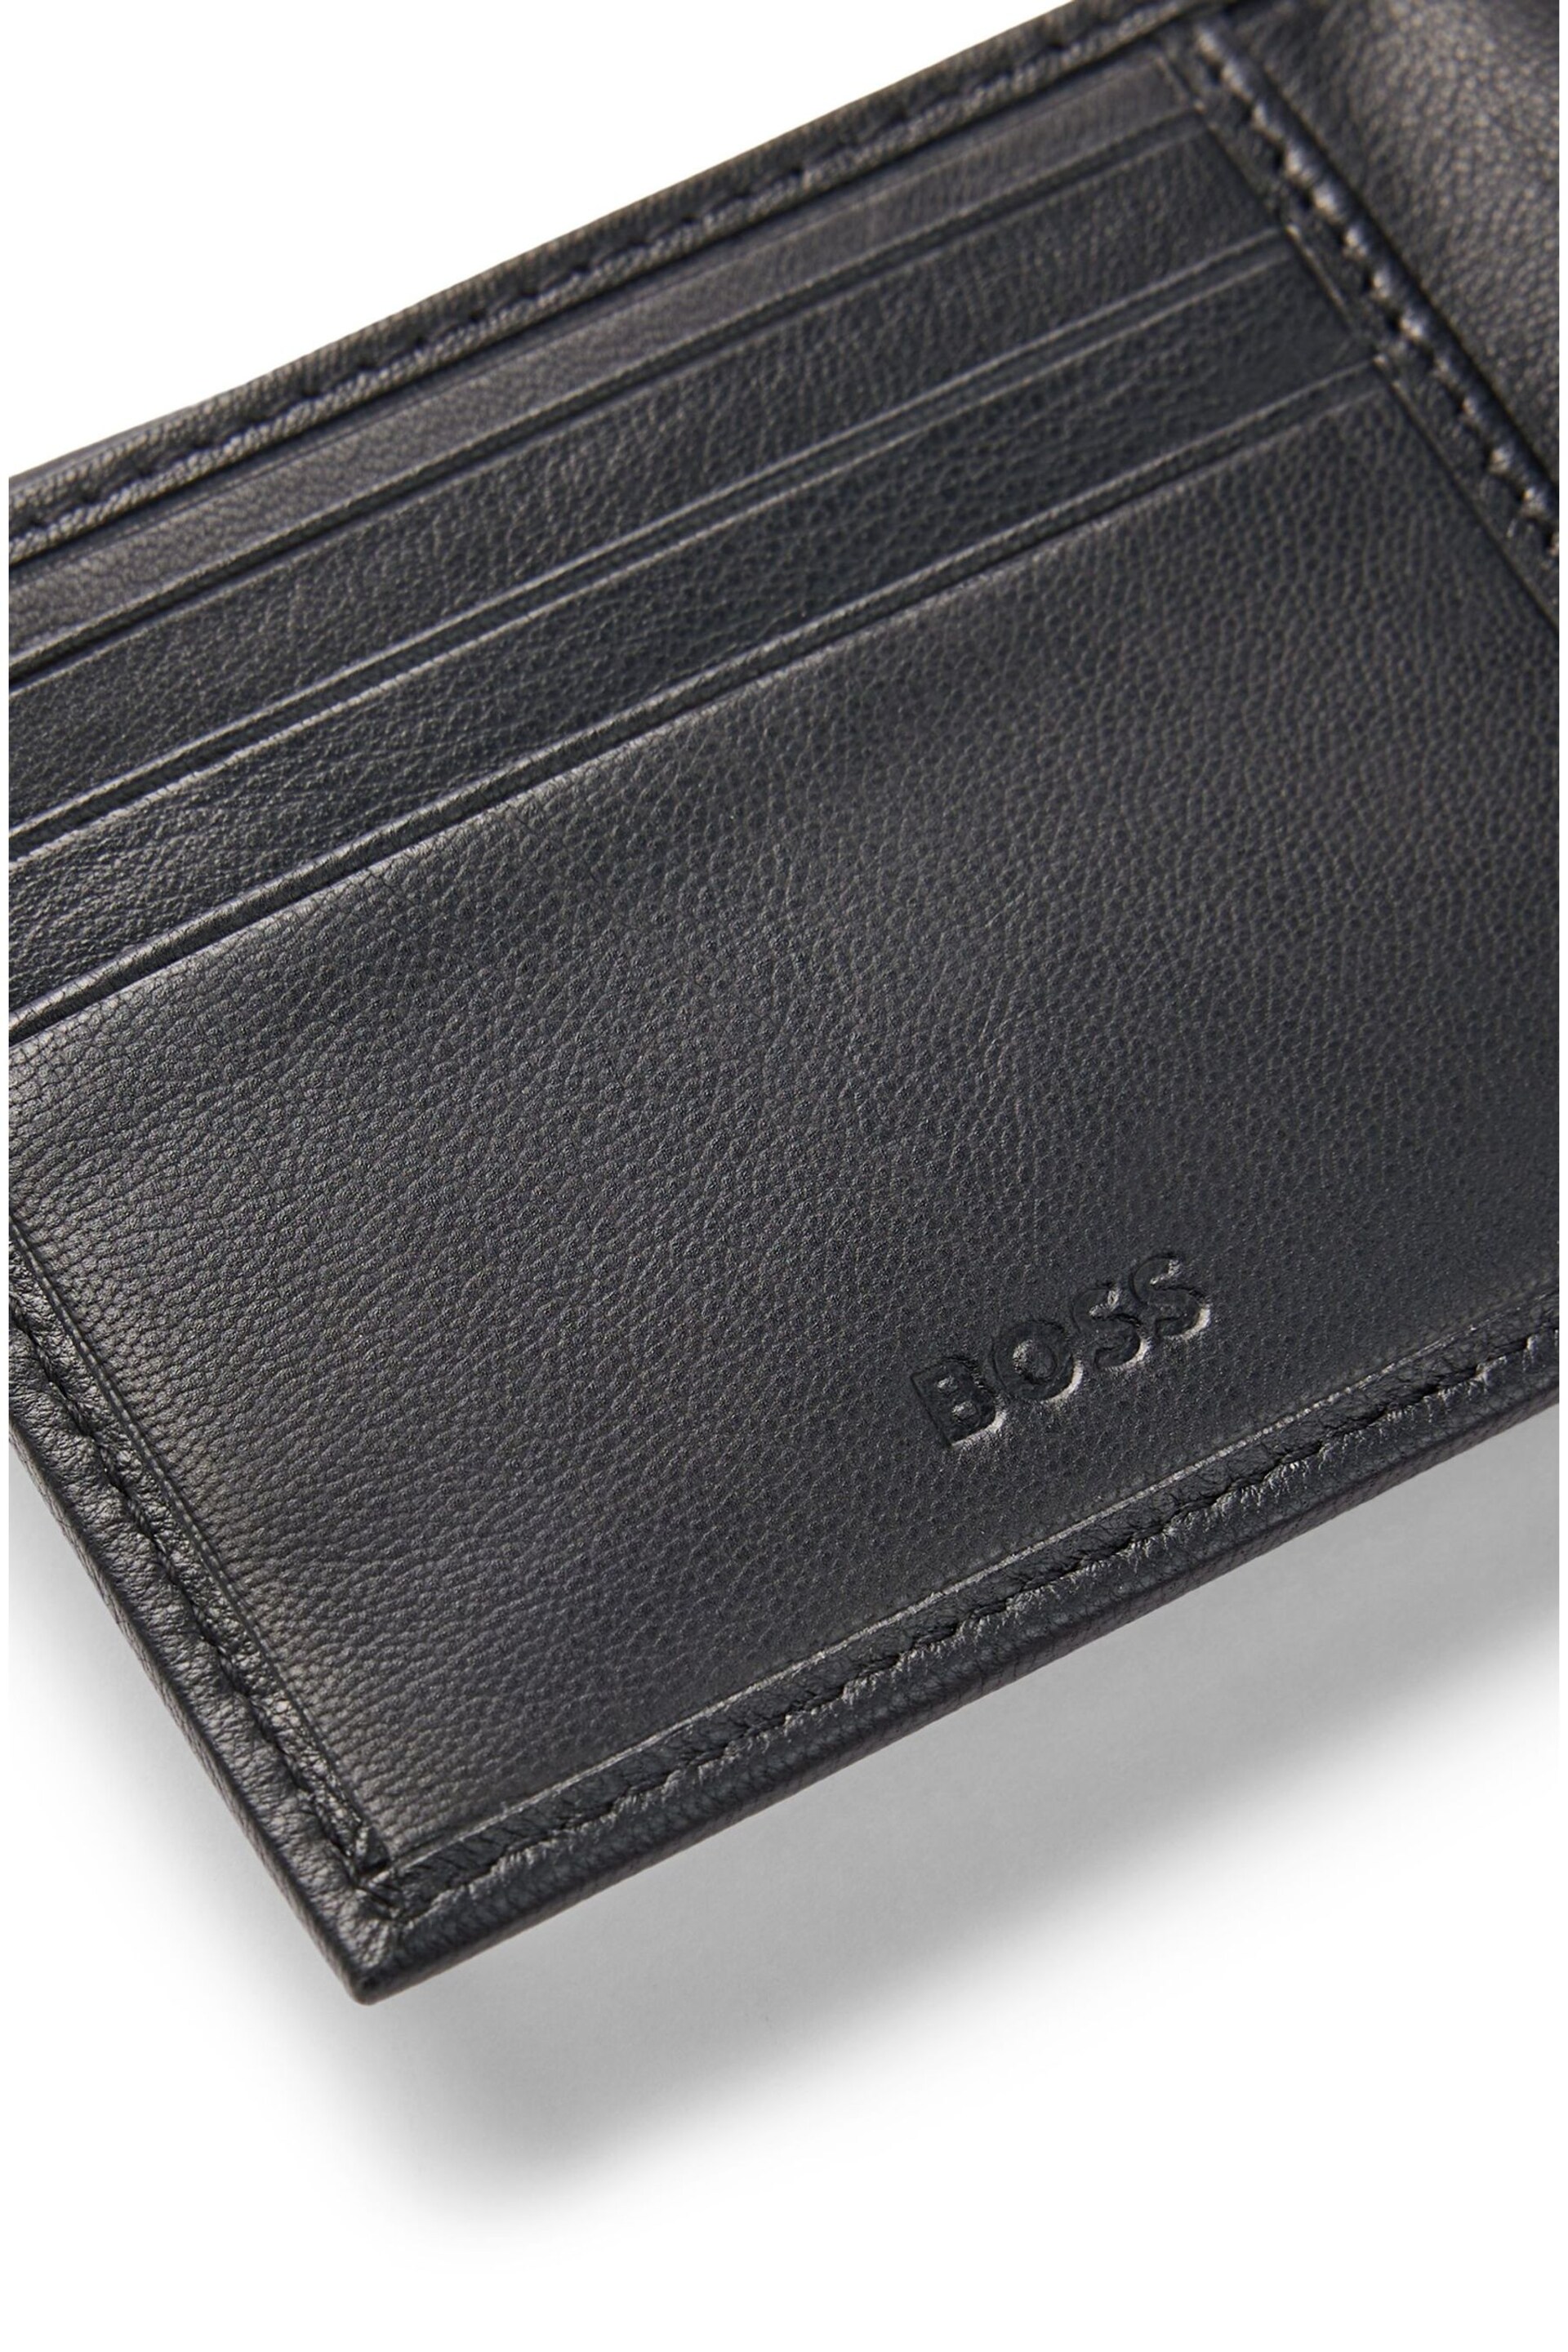 BOSS Black Embossed Logo Wallet in Grained Leather - Image 3 of 4